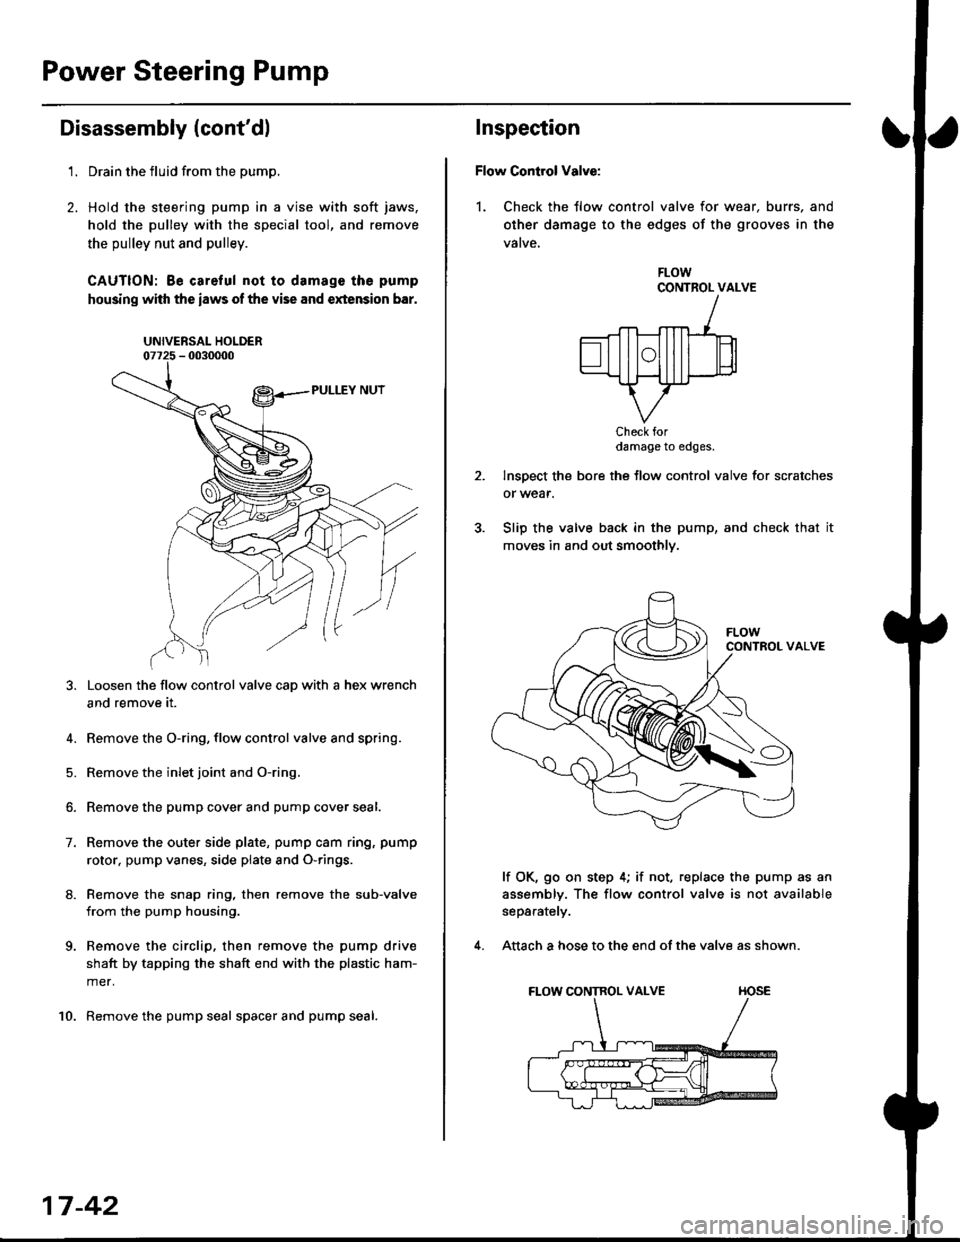 HONDA CIVIC 1996 6.G Owners Guide Power Steering Pump
Disassembly (contdl
2.
t.Drain the fluid from the pump.
Hold the steering pump in a vise with soft jaws,
hold the pulley with the special tool, and remove
the pulley nut and pull